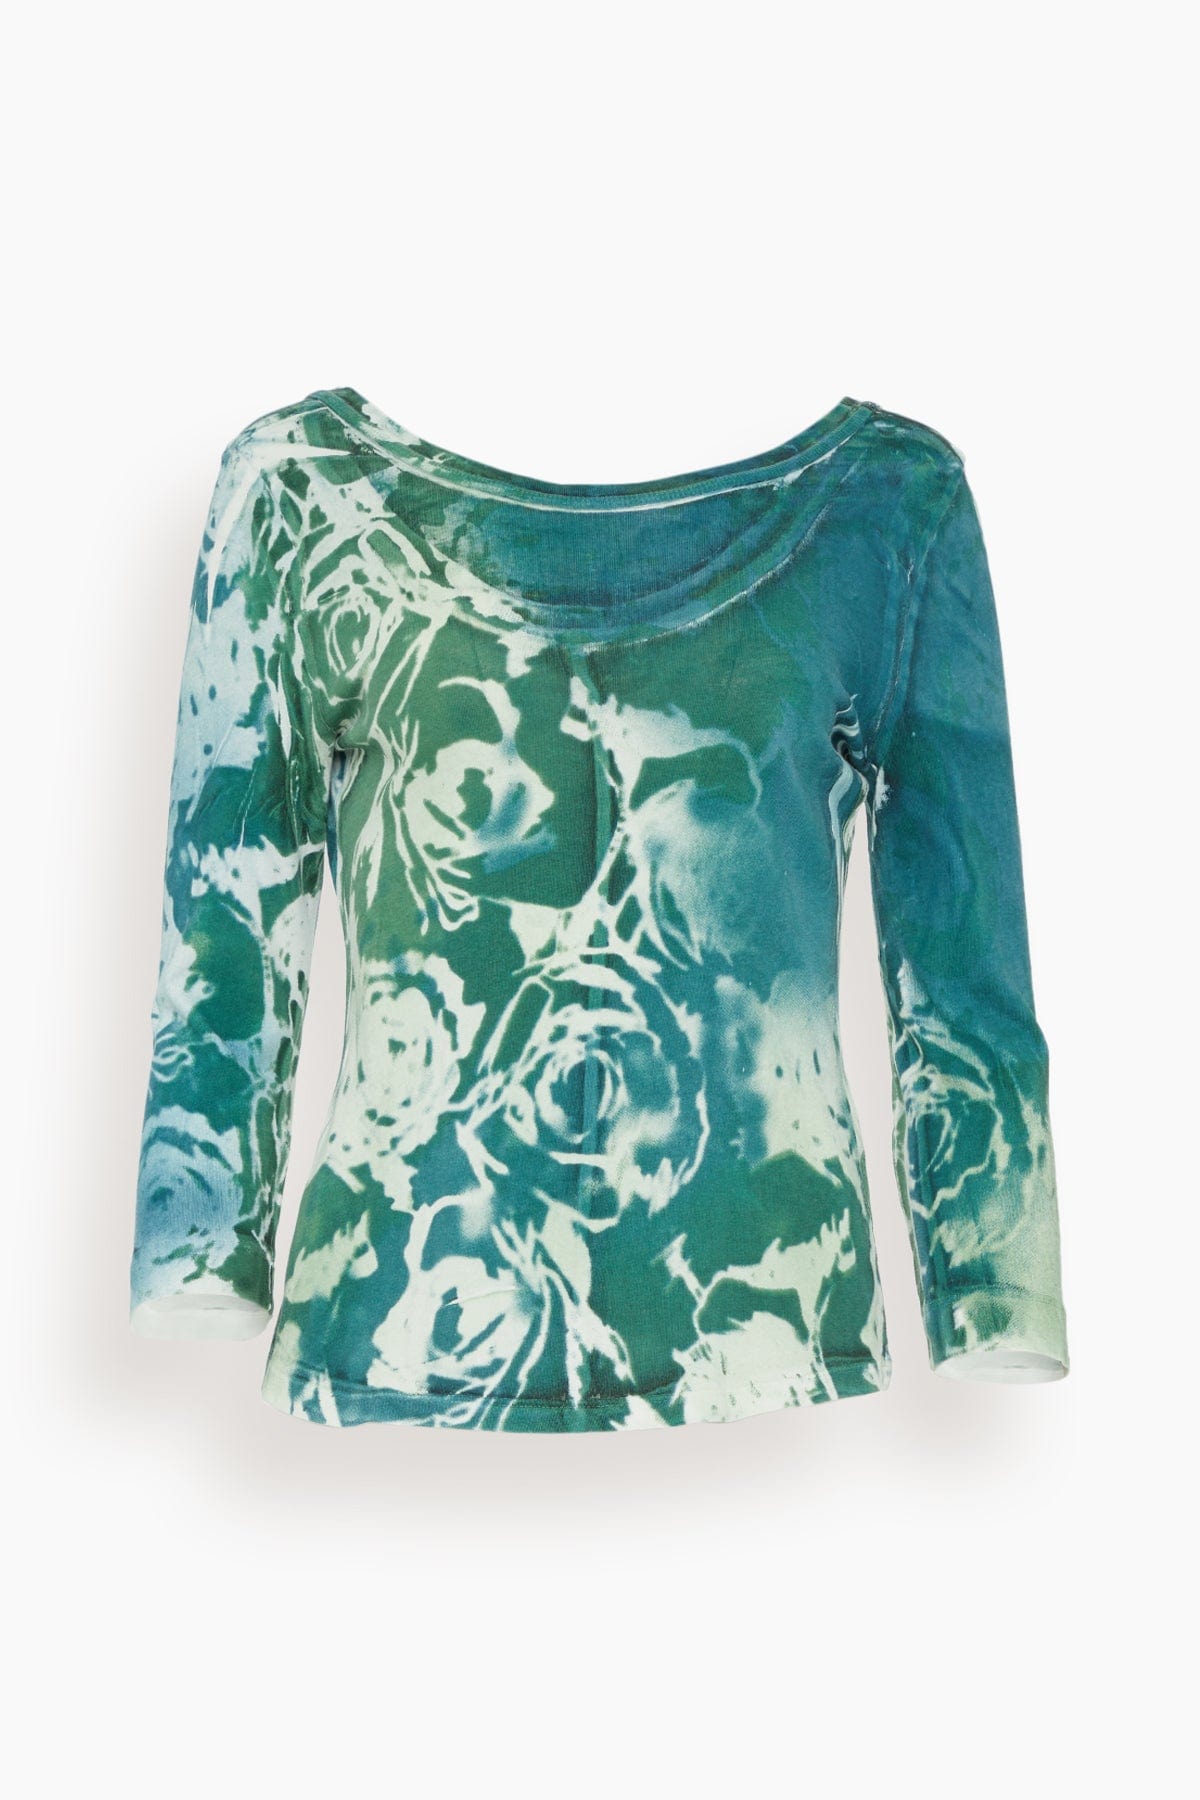 Raquel Allegra Tops Bryony Top in Teal Army Rose